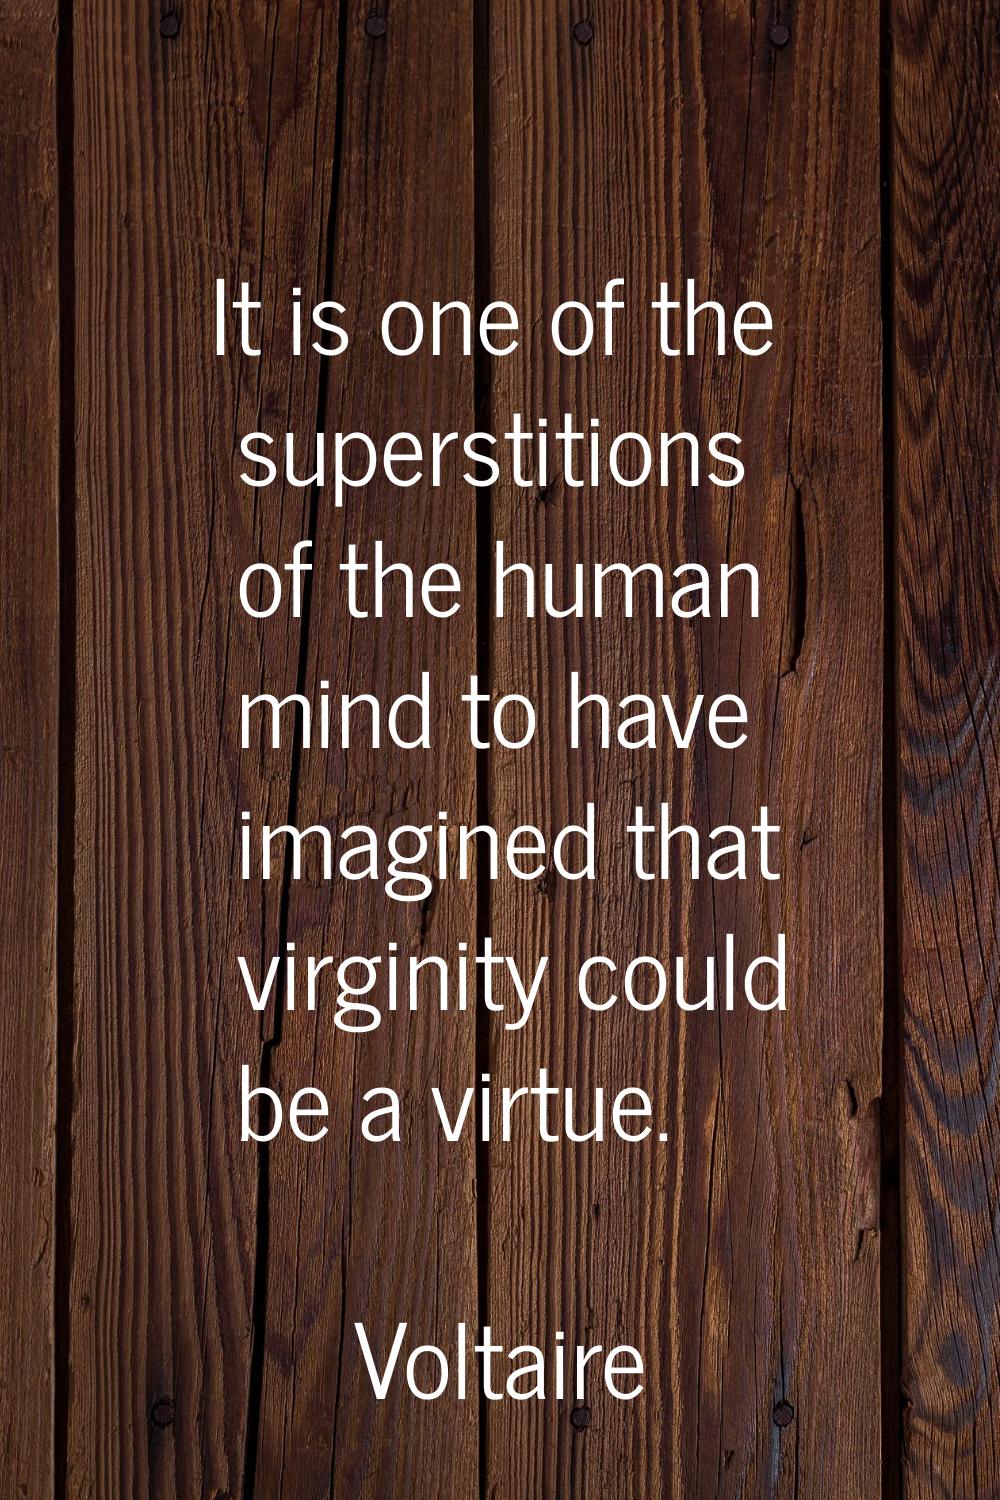 It is one of the superstitions of the human mind to have imagined that virginity could be a virtue.